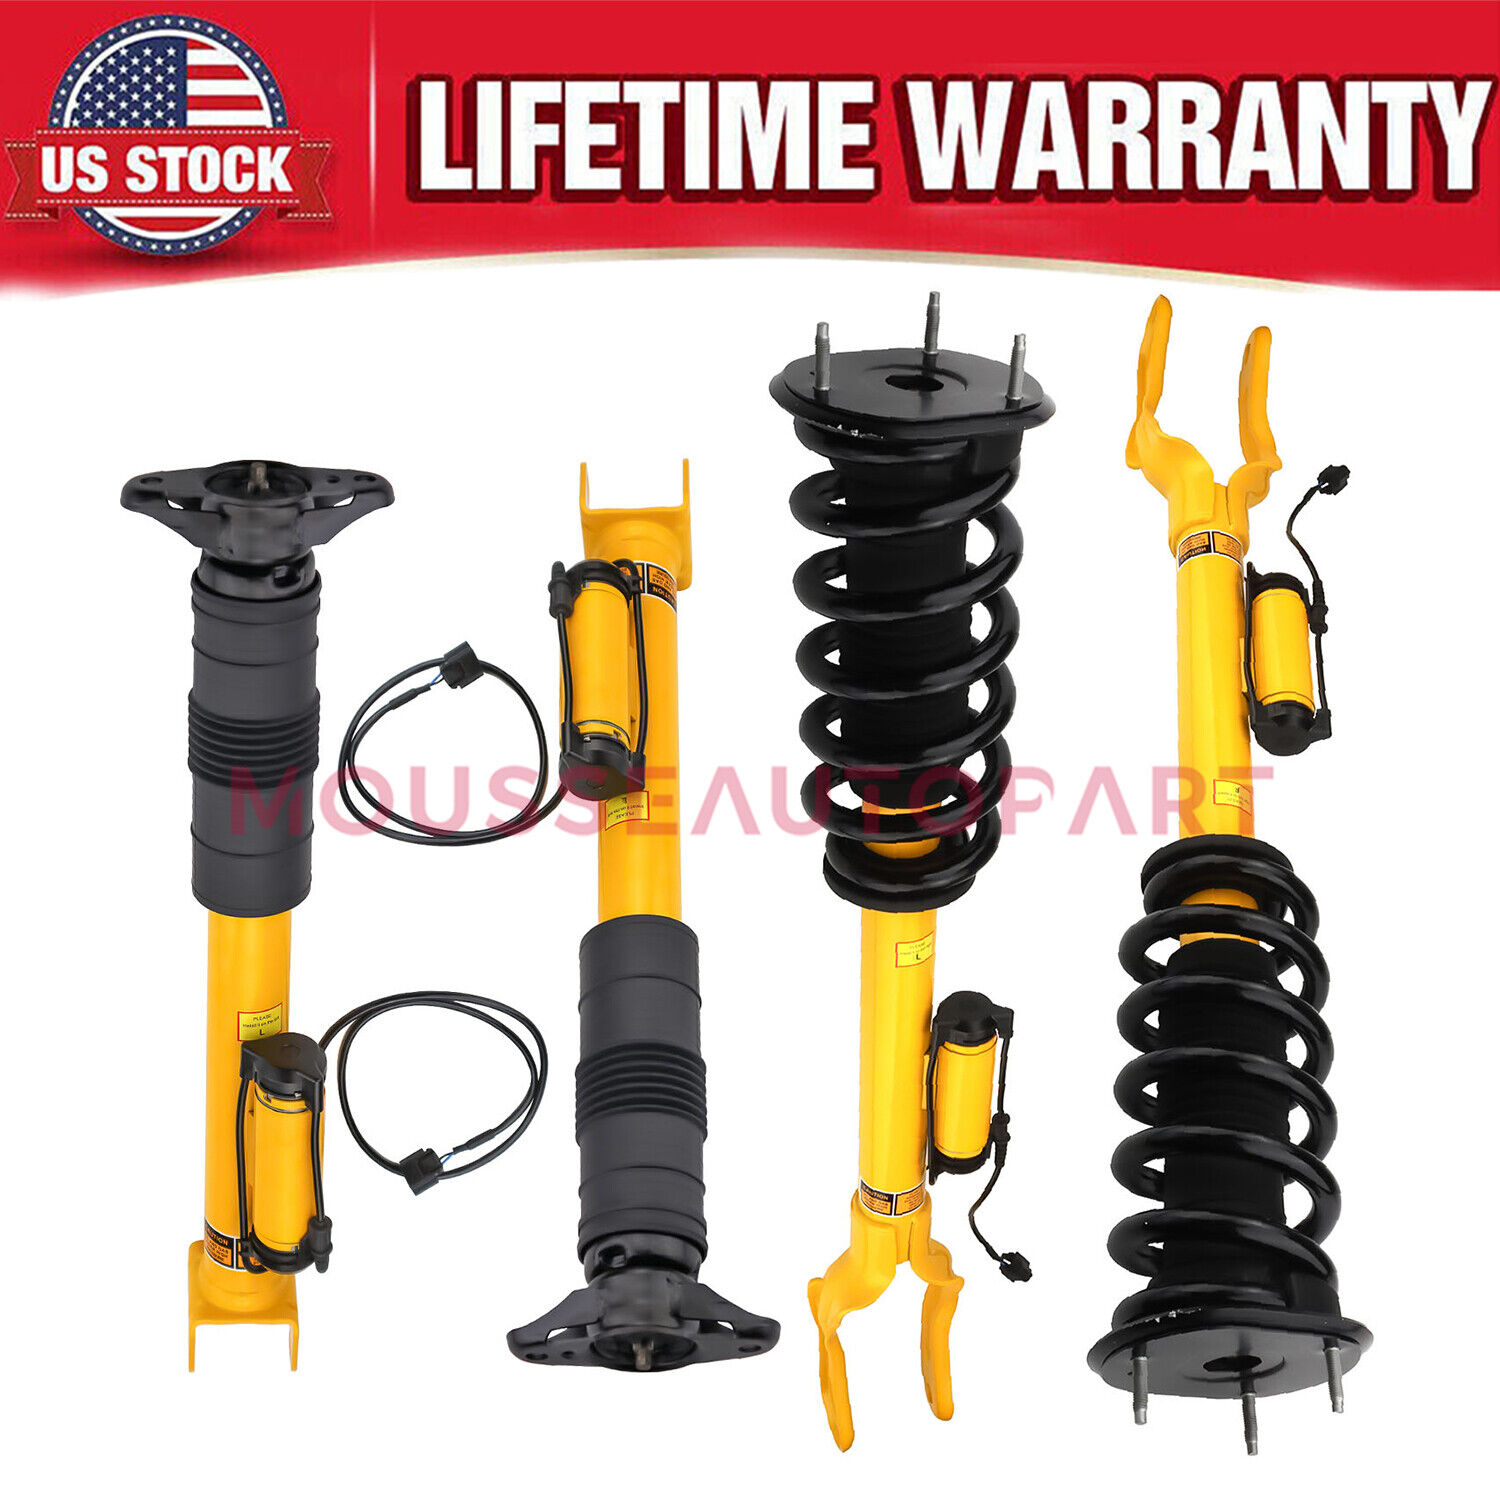 4x Front Rear Shock Spring Struts Assys For Jeep Grand Cherokee SRT8 2012-2015